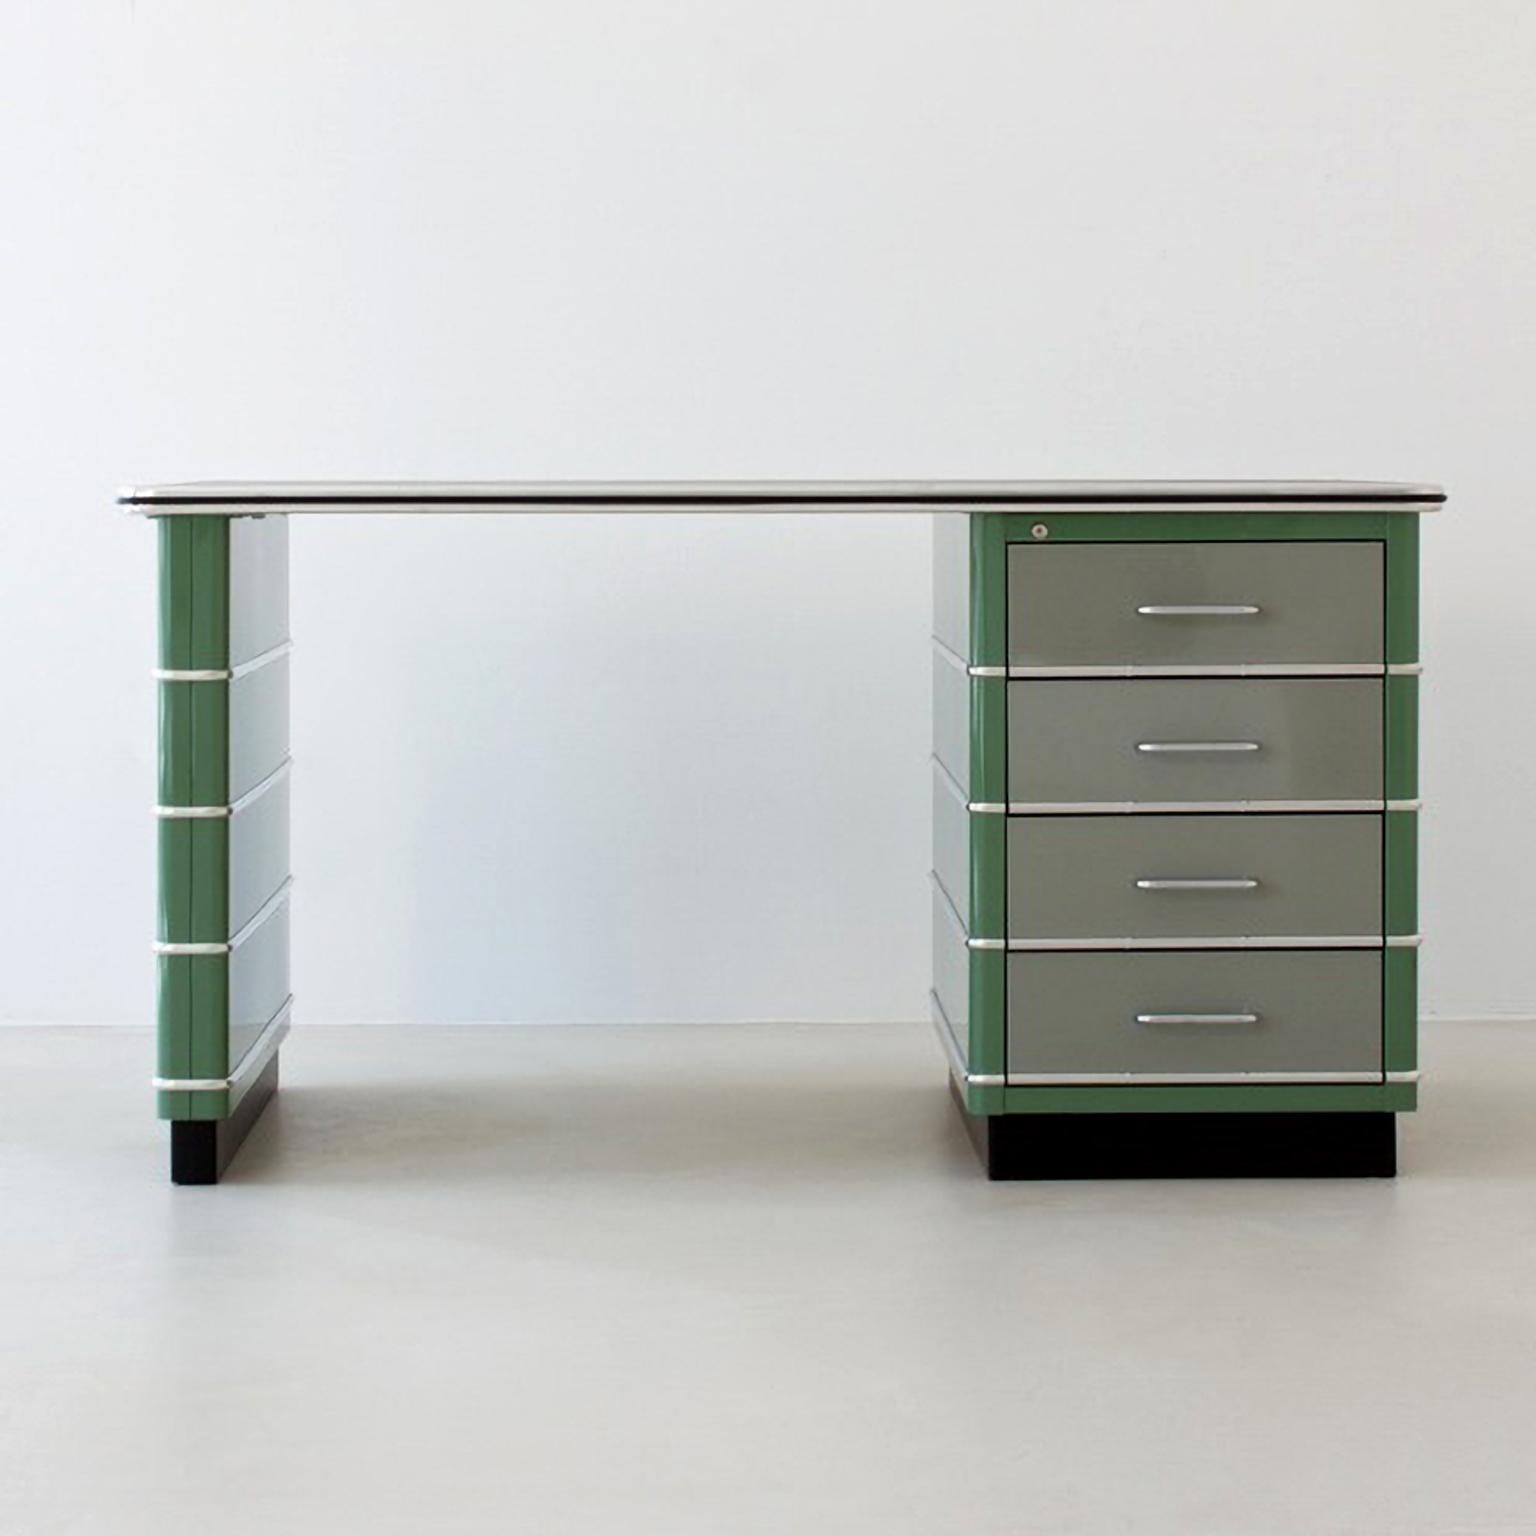 Made to Measure Metal Desk, Lacquered Metal, Industrial Design, Germany, 2018 For Sale 1